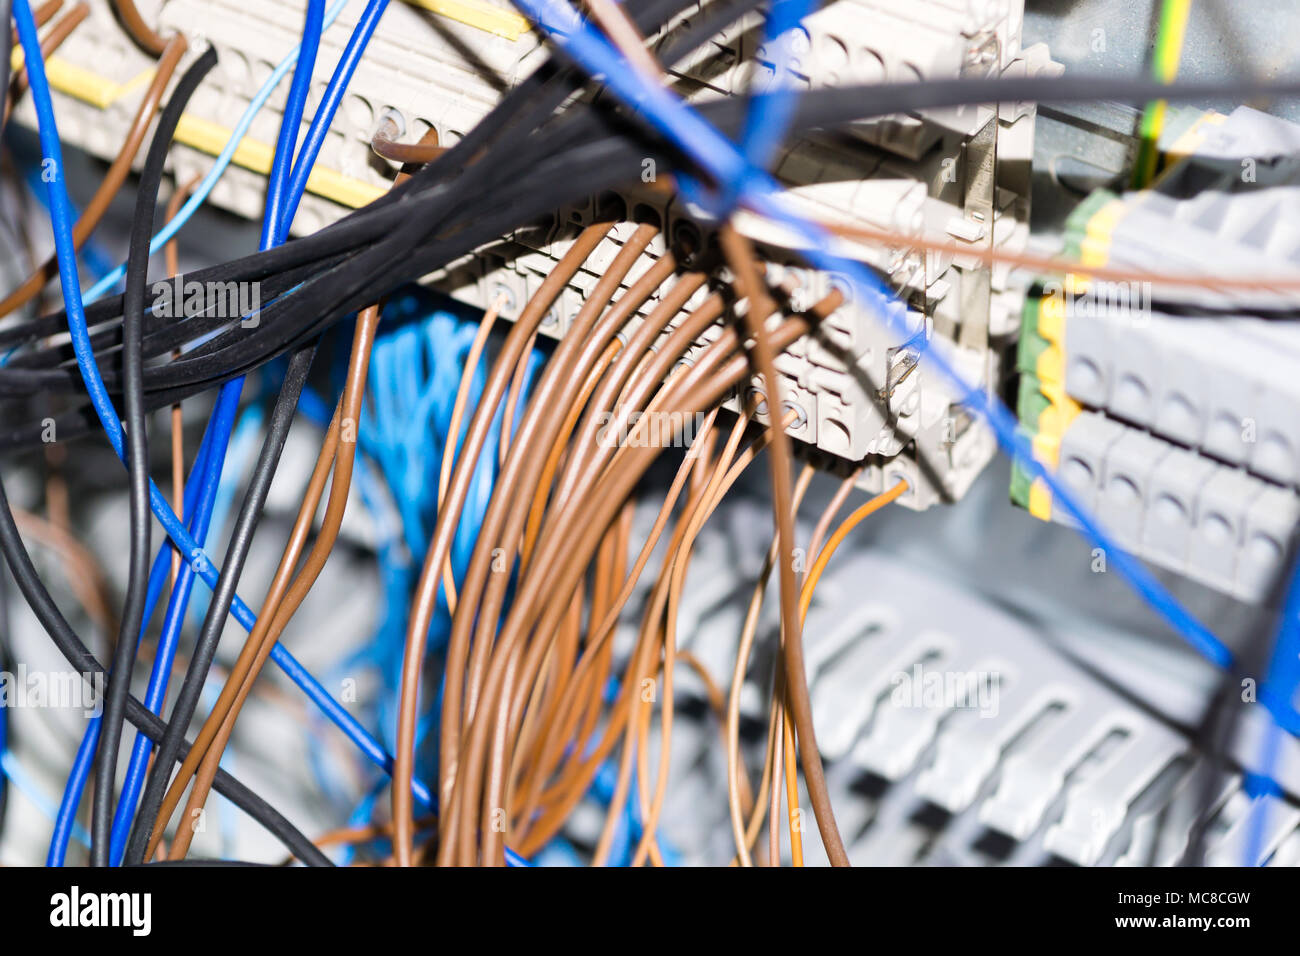 Electrical equipment components installation in fuse box. Wiring and connections. Stock Photo